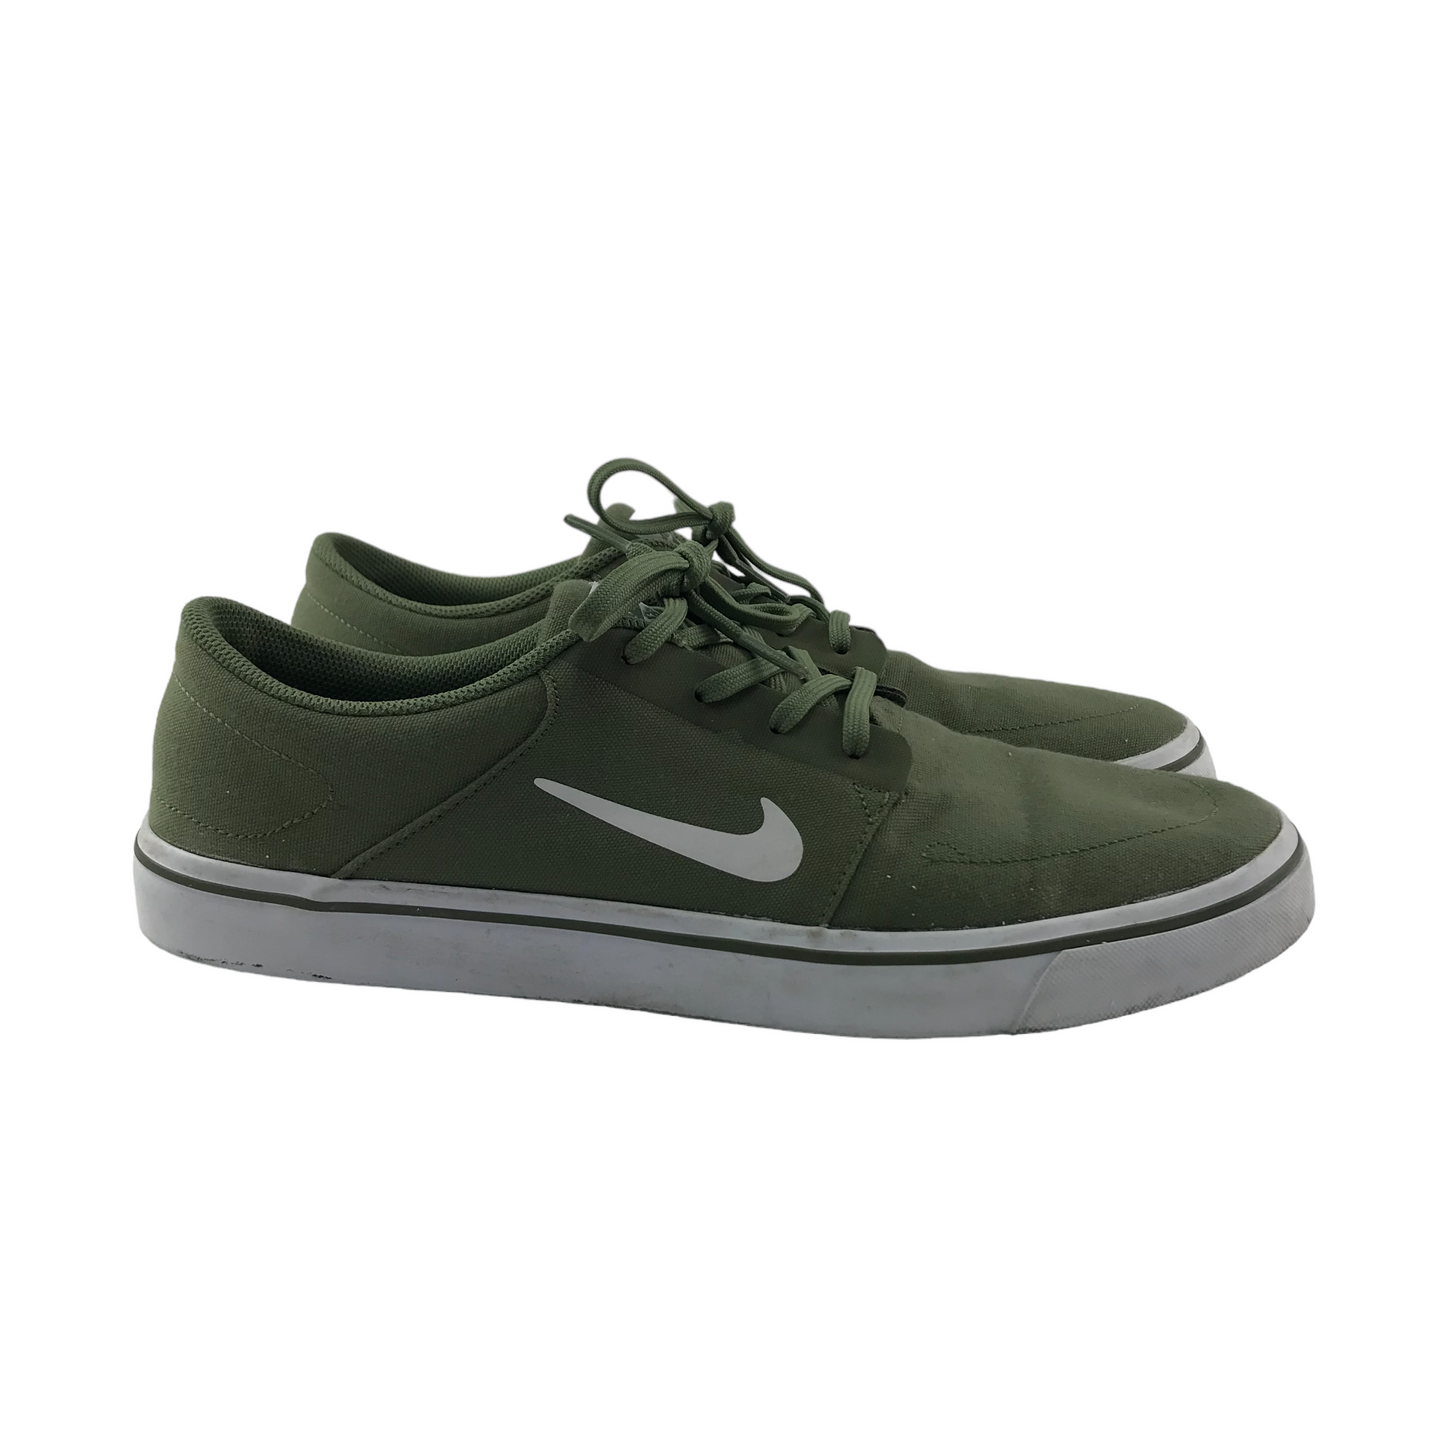 Nike SB Trainers Shoe Size 8.5 Khaki Green Flat Soles and Laces